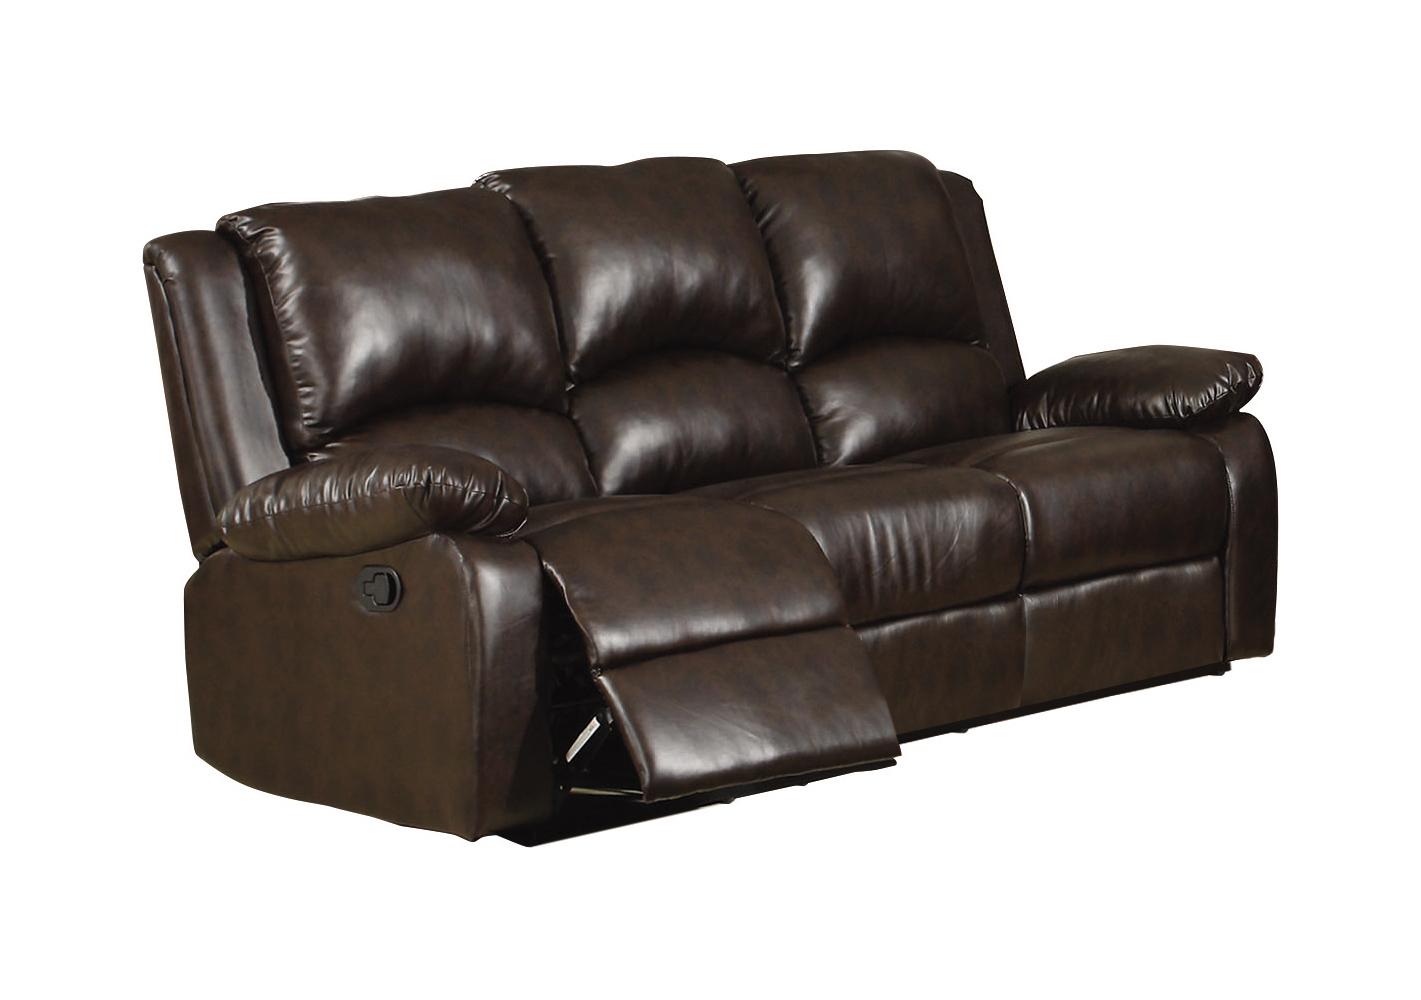 Transitional Motion Sofa 600971 Boston 600971 in Brown Leatherette